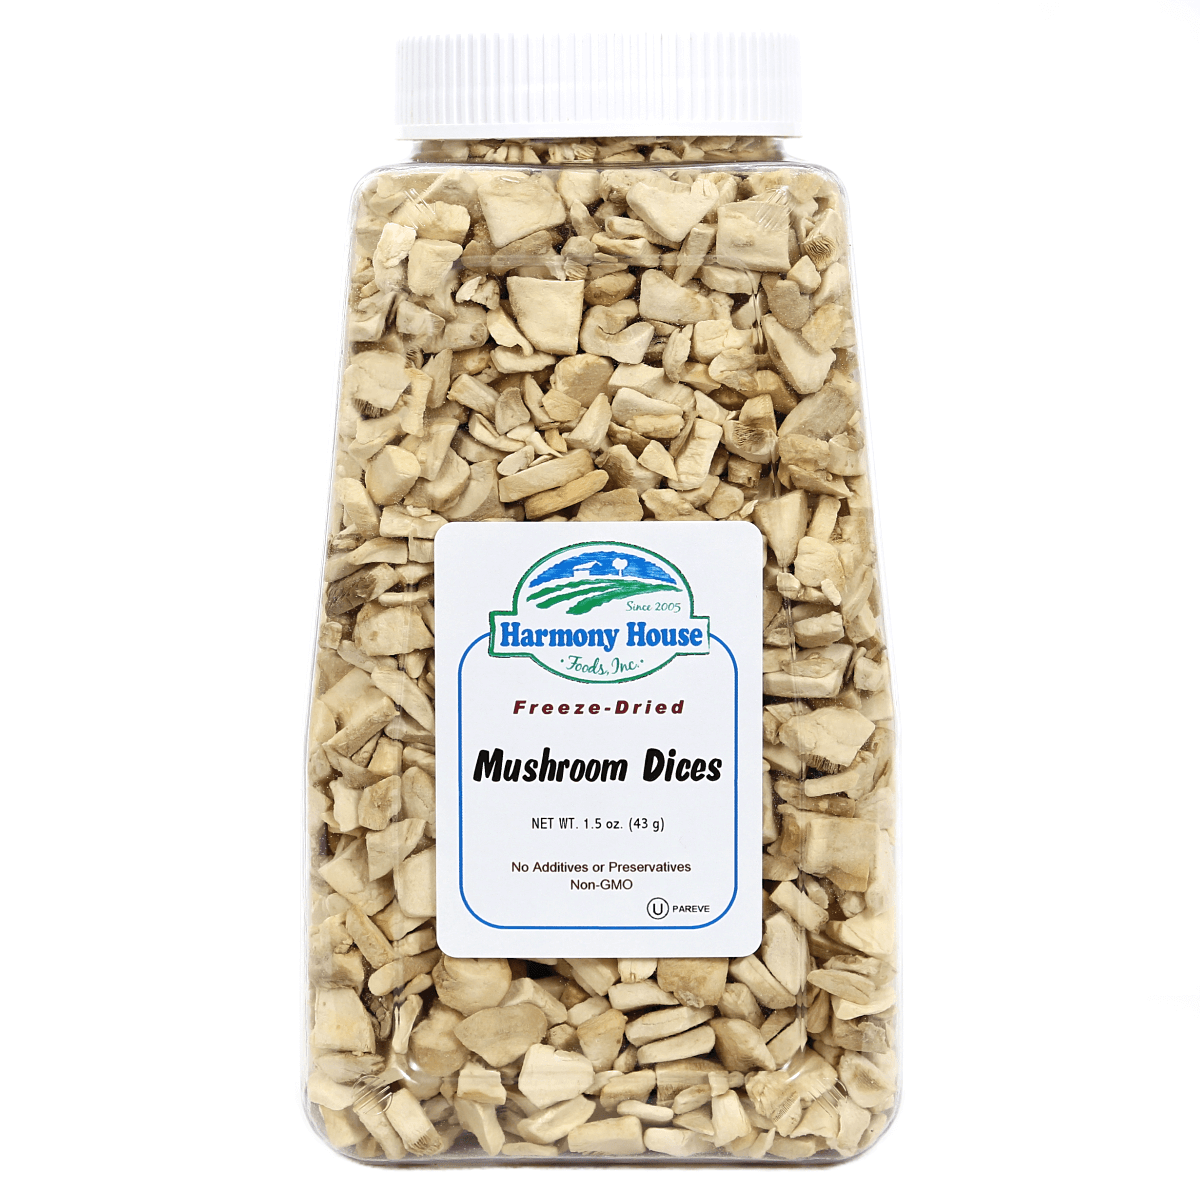 A quart jar of Harmony House Freeze-Dried Mushroom Dices, offering 16 servings, showcased on a white background.